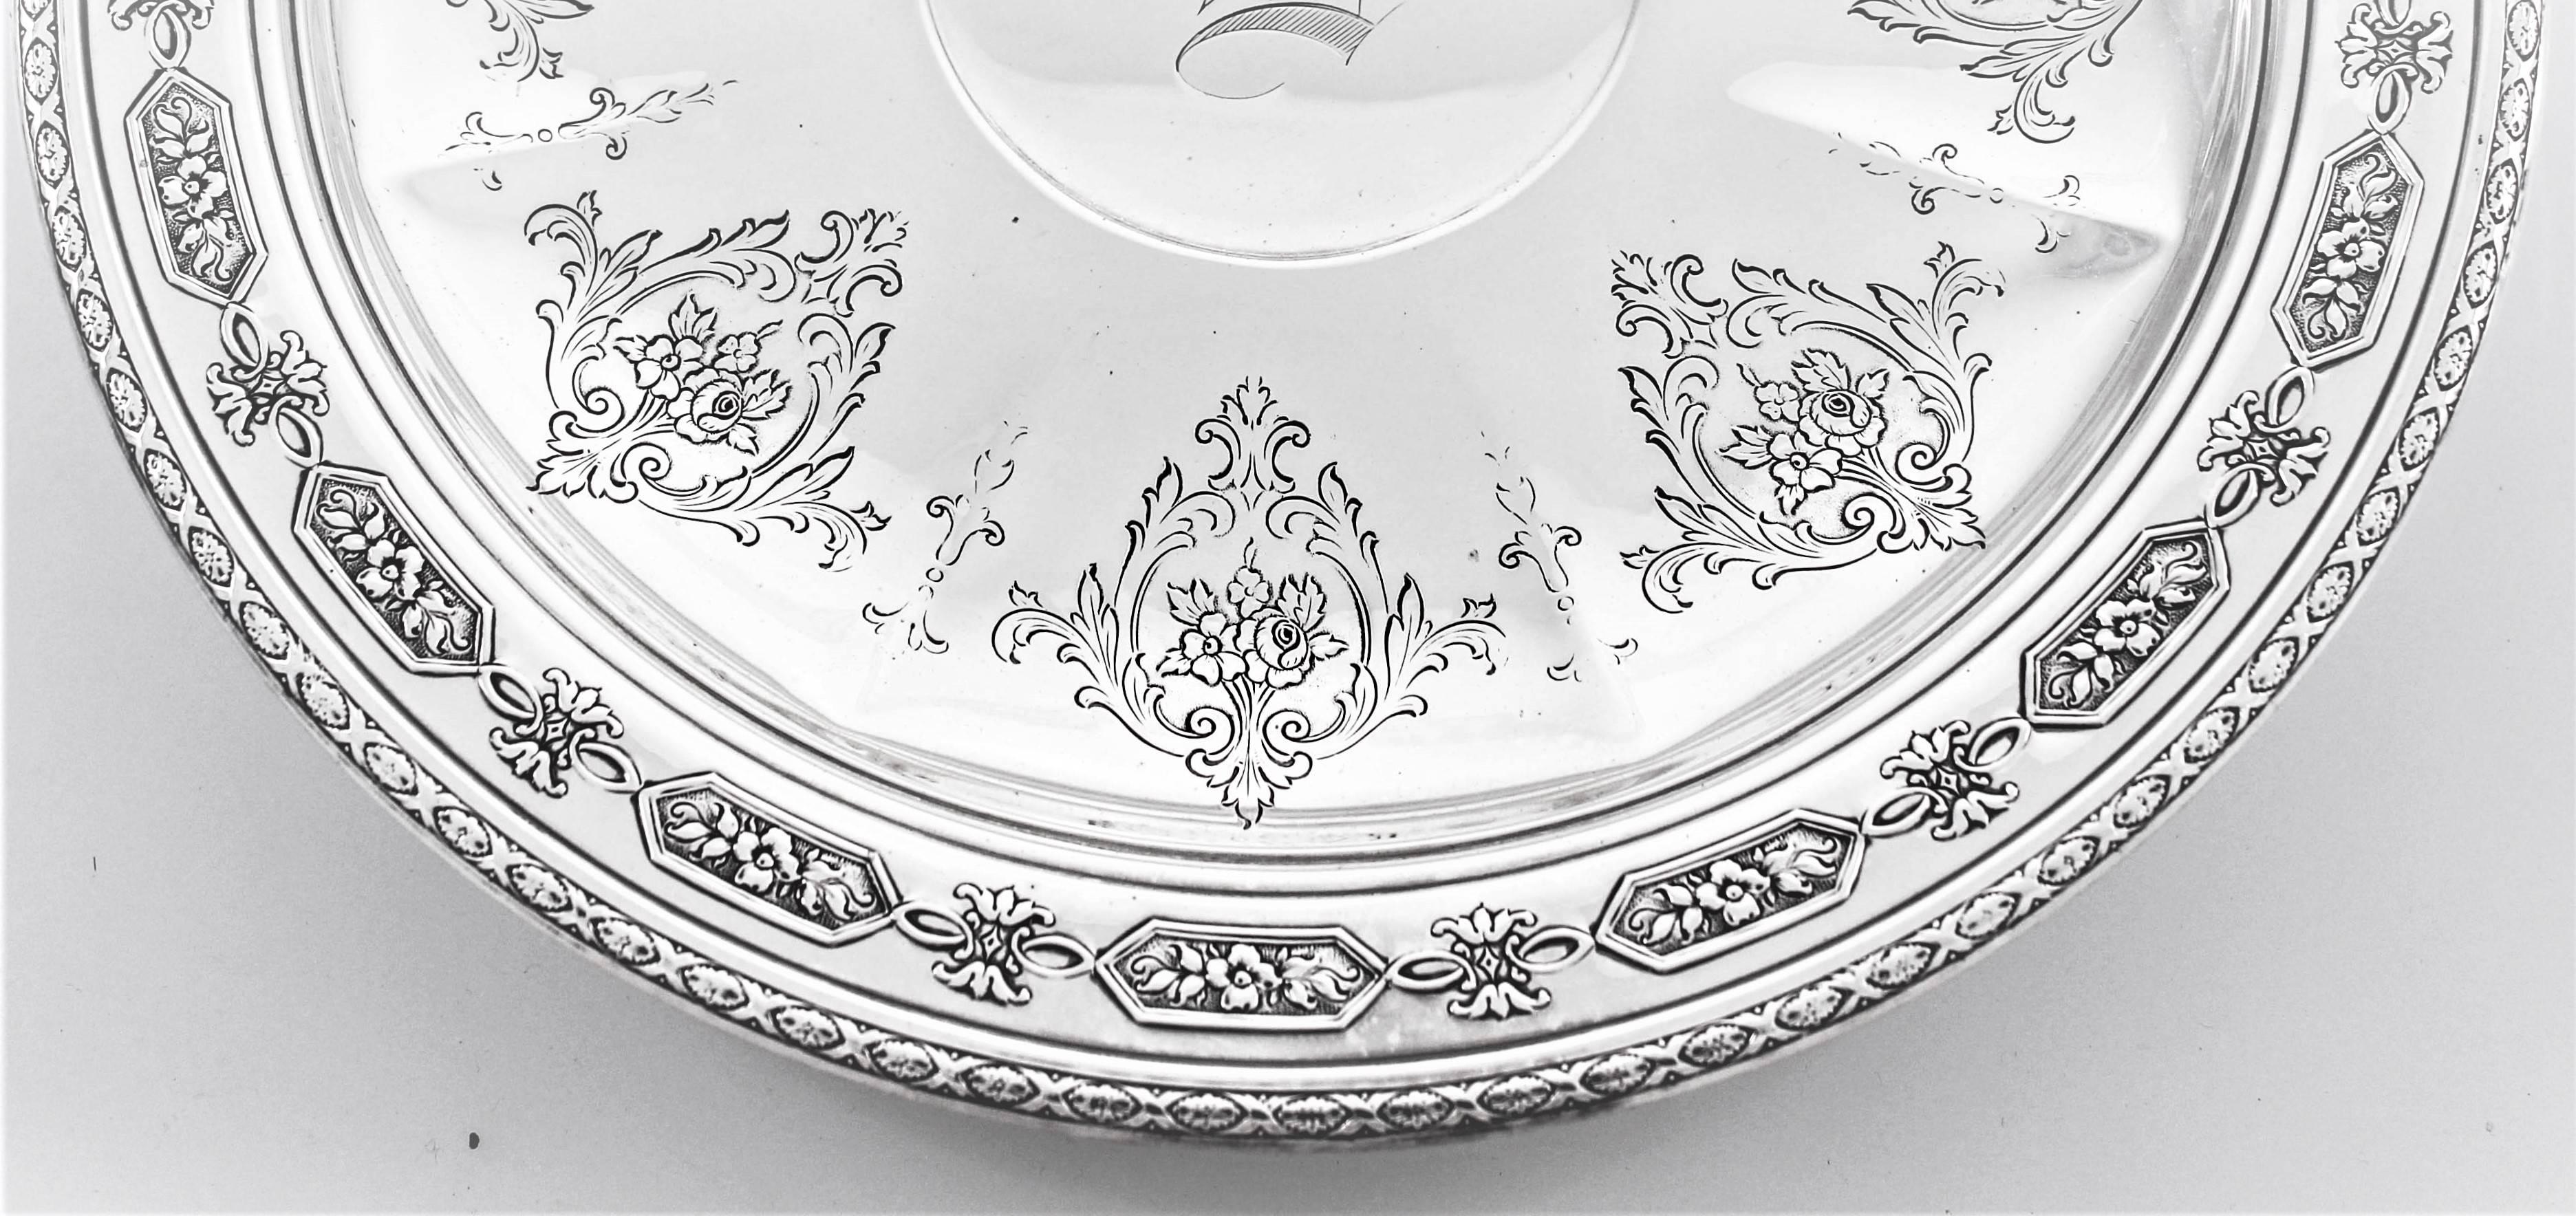 Like it’s namesake, this dish stands proud and regal. A wide rim with a decorative pattern encircles it. Eight sets of etched flowers within a medallion decorate the inside. In the center there is a hand engraved letter L monogram in Old English.